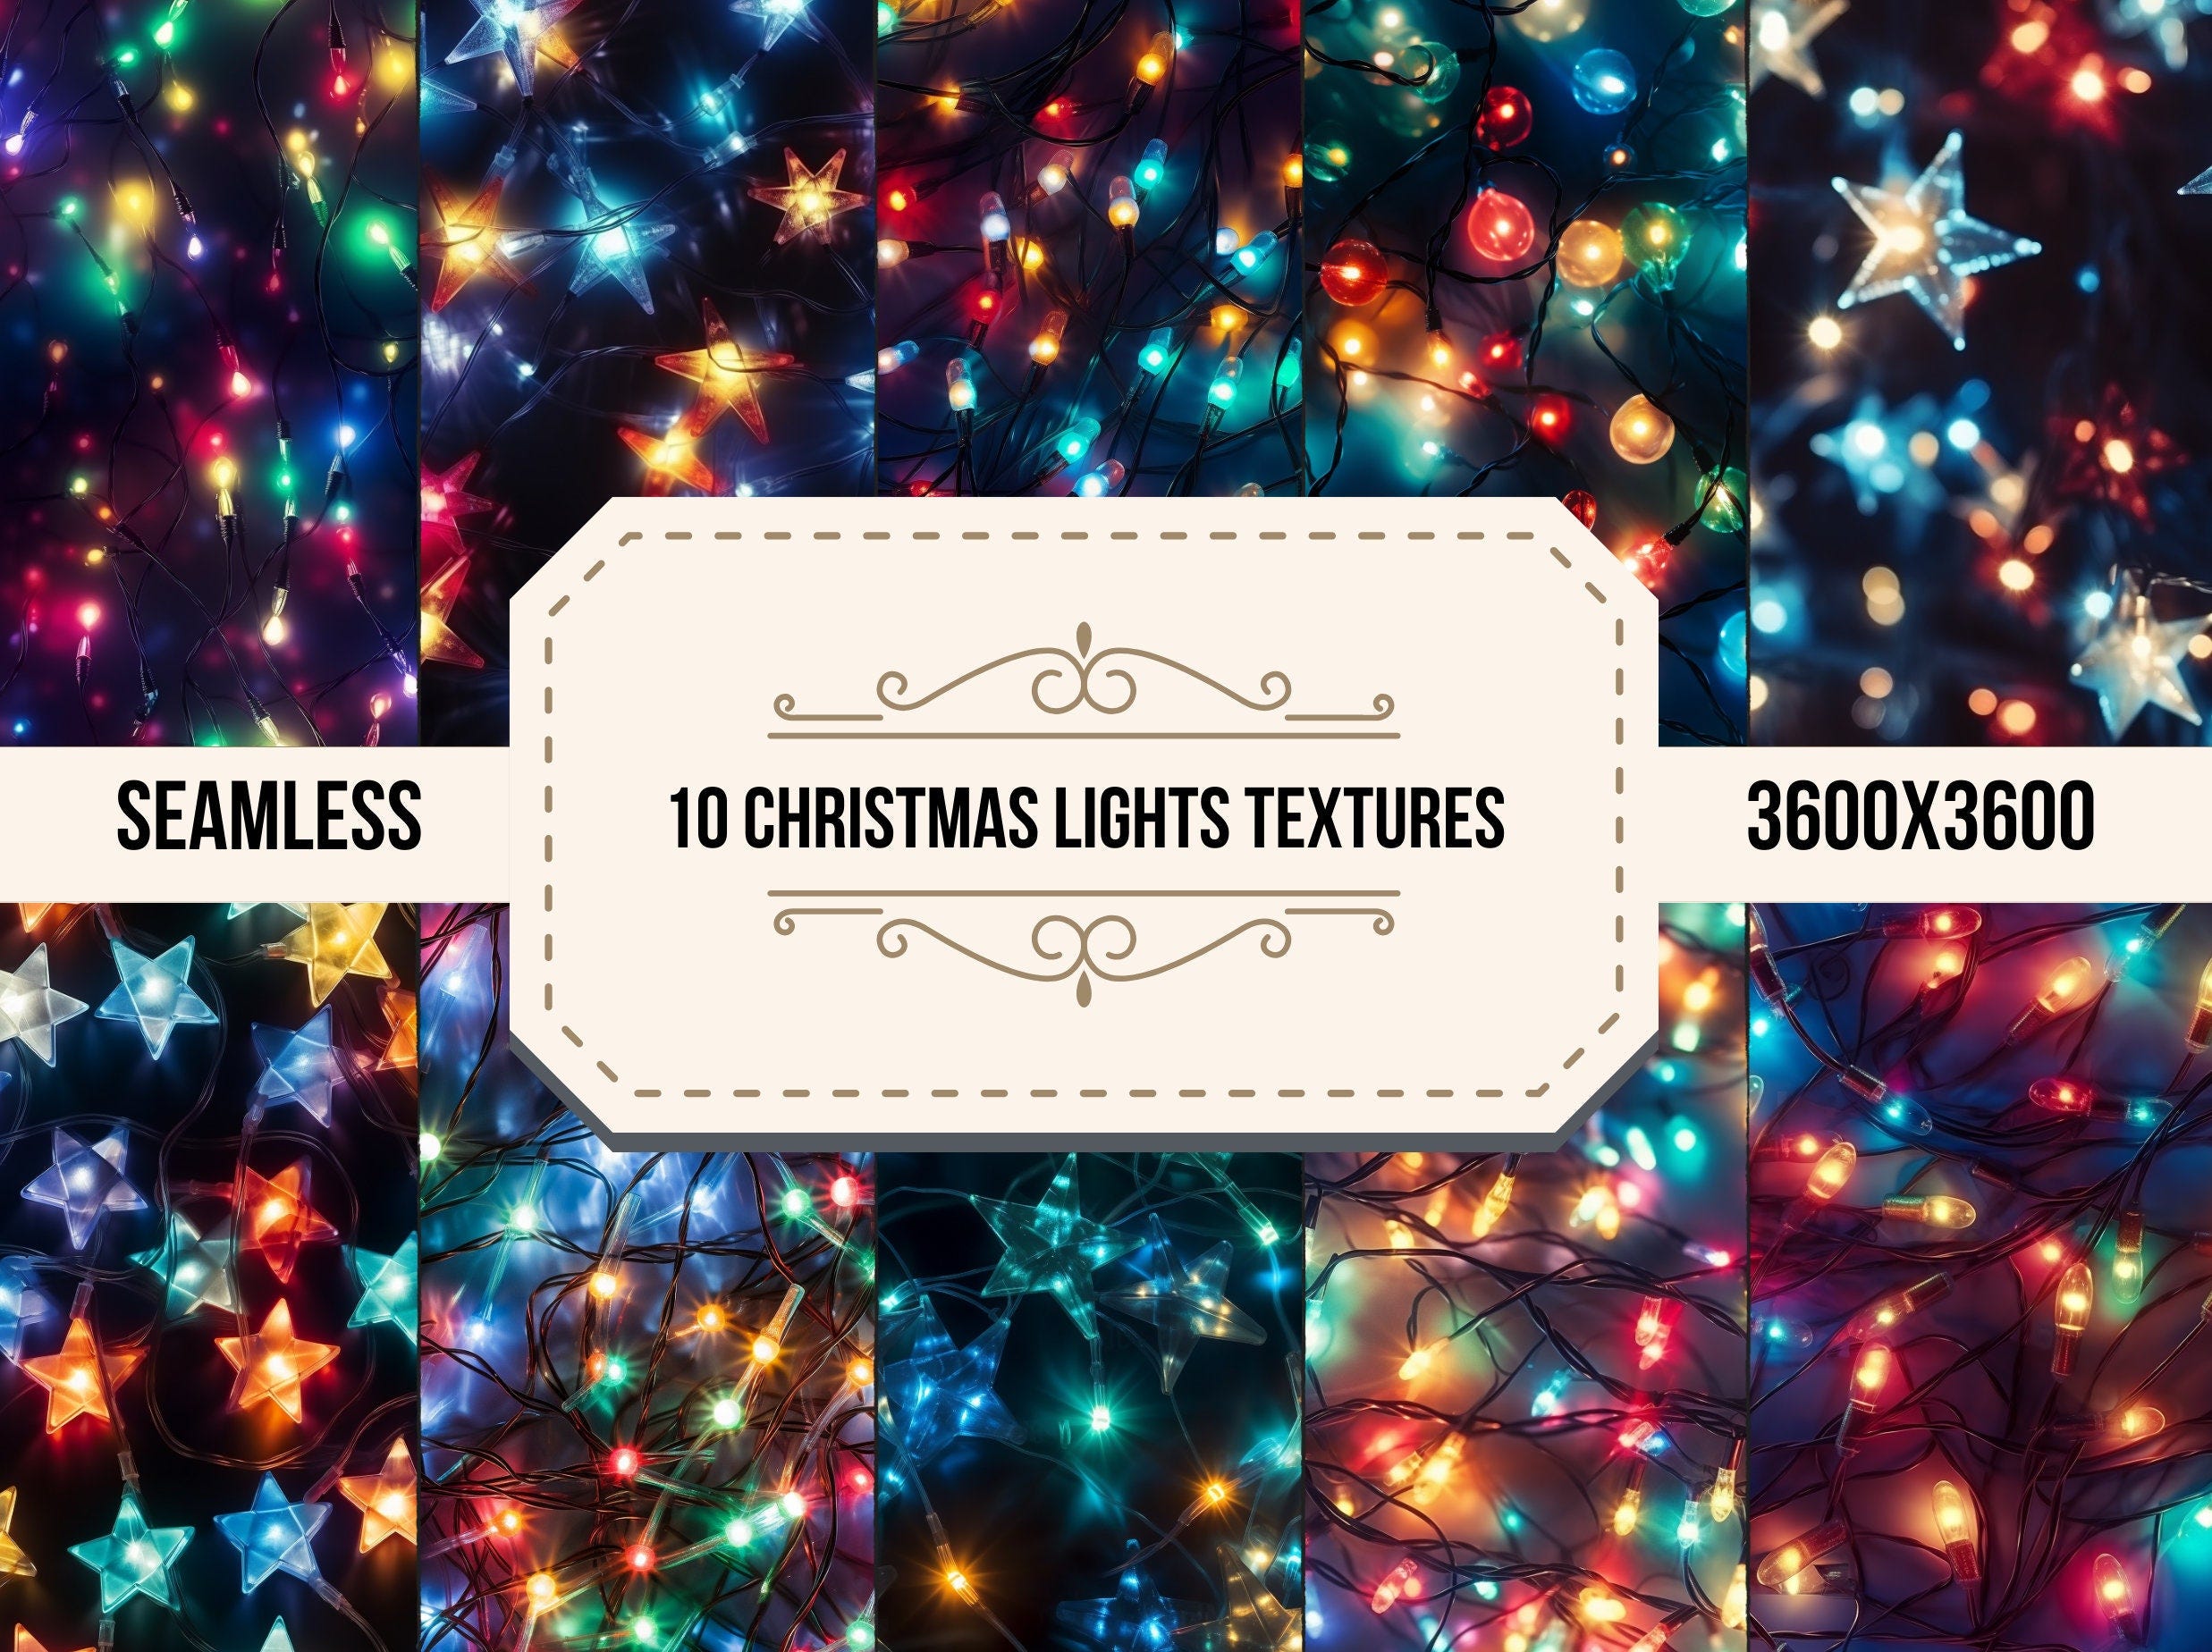 Colorful Christmas lights textures pack, Christmas digital texture, Christmas lights seamless pattern, xmas lights photo, digital download